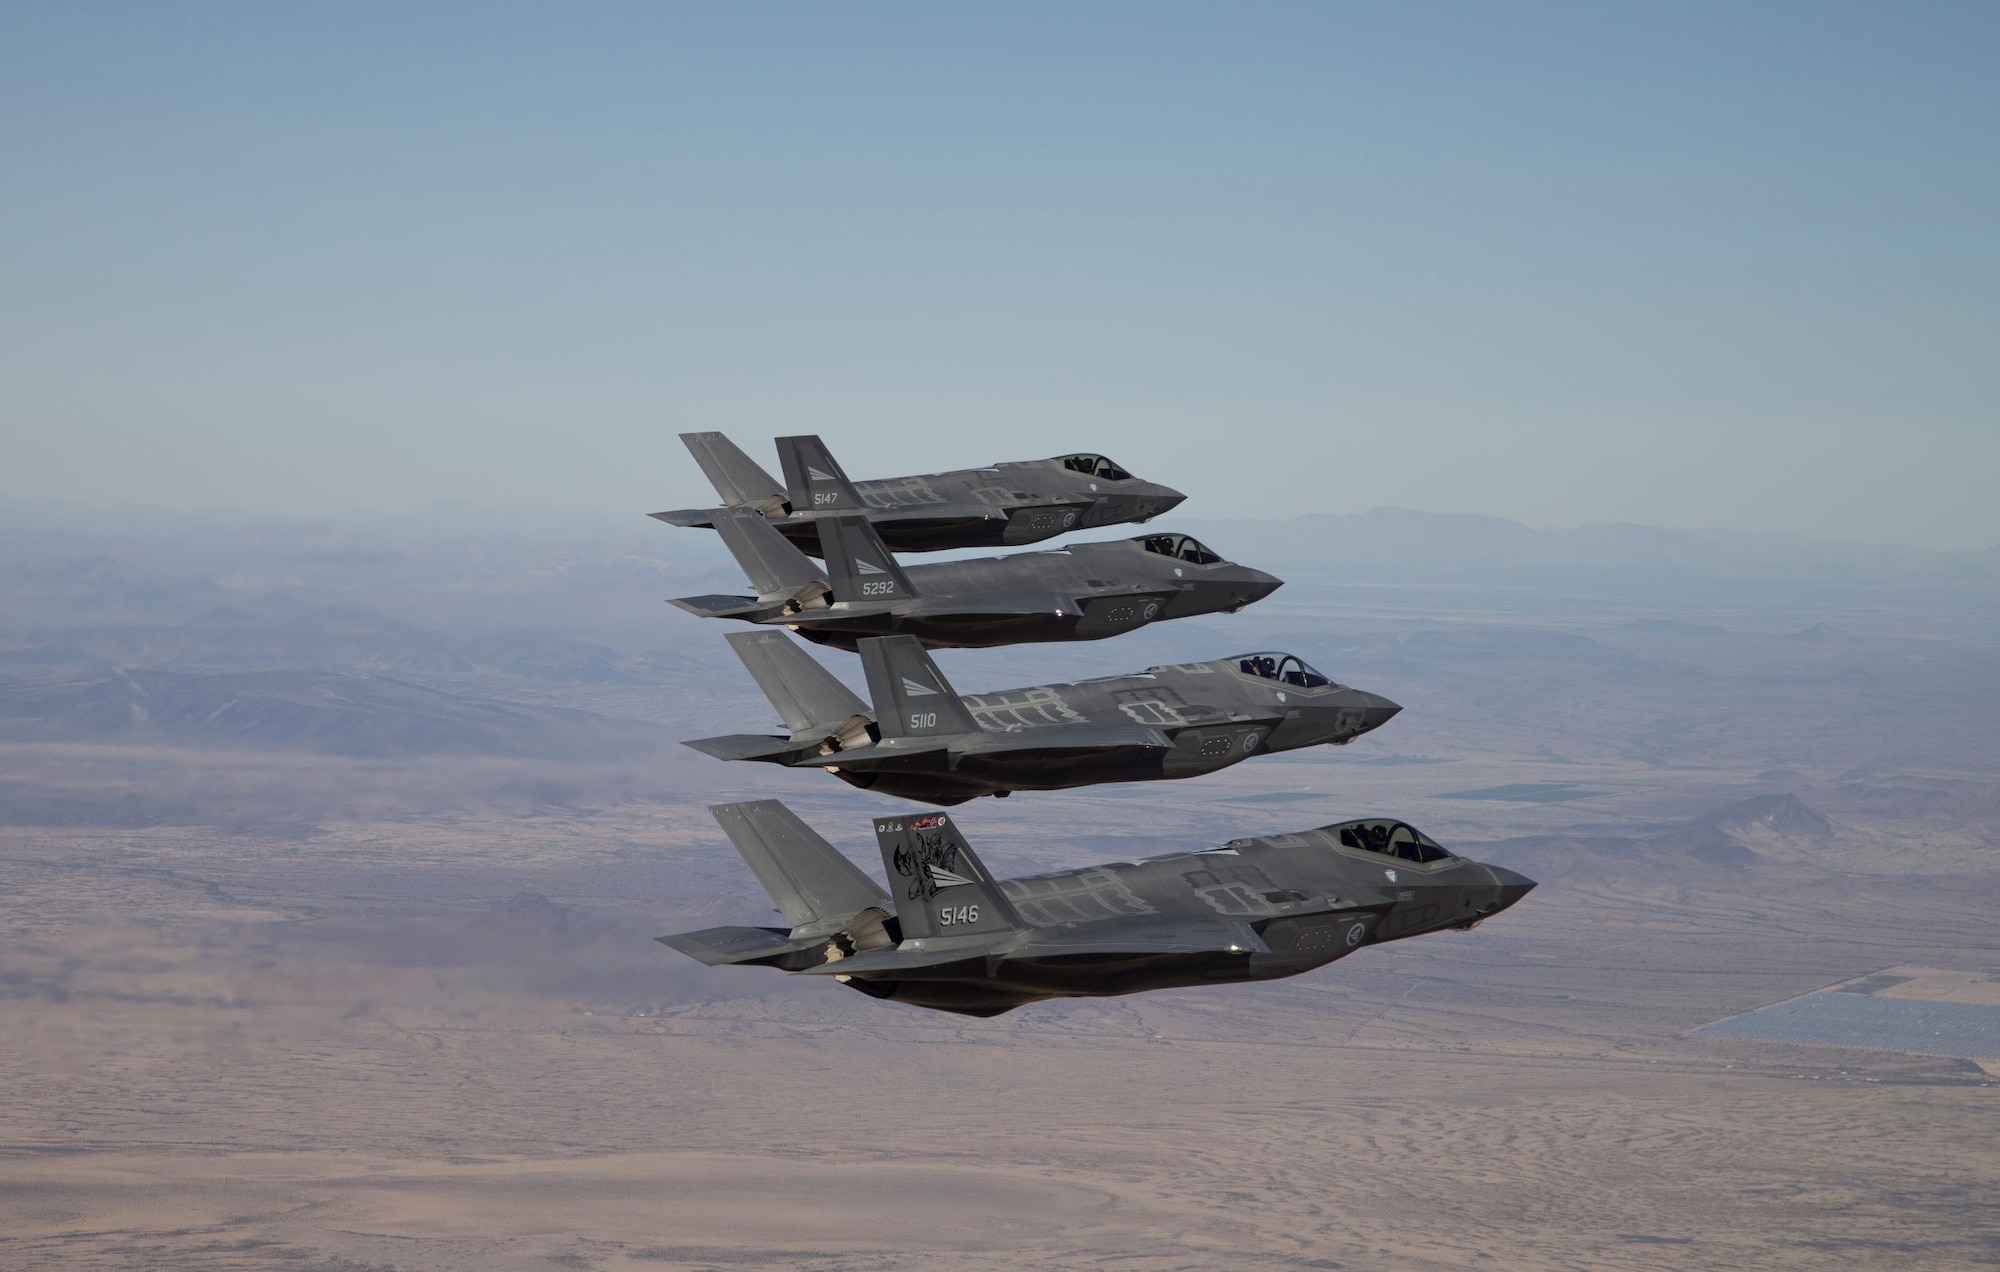 Four Royal Norwegian Air Force F-35 Lightning II aircraft fly in formation.